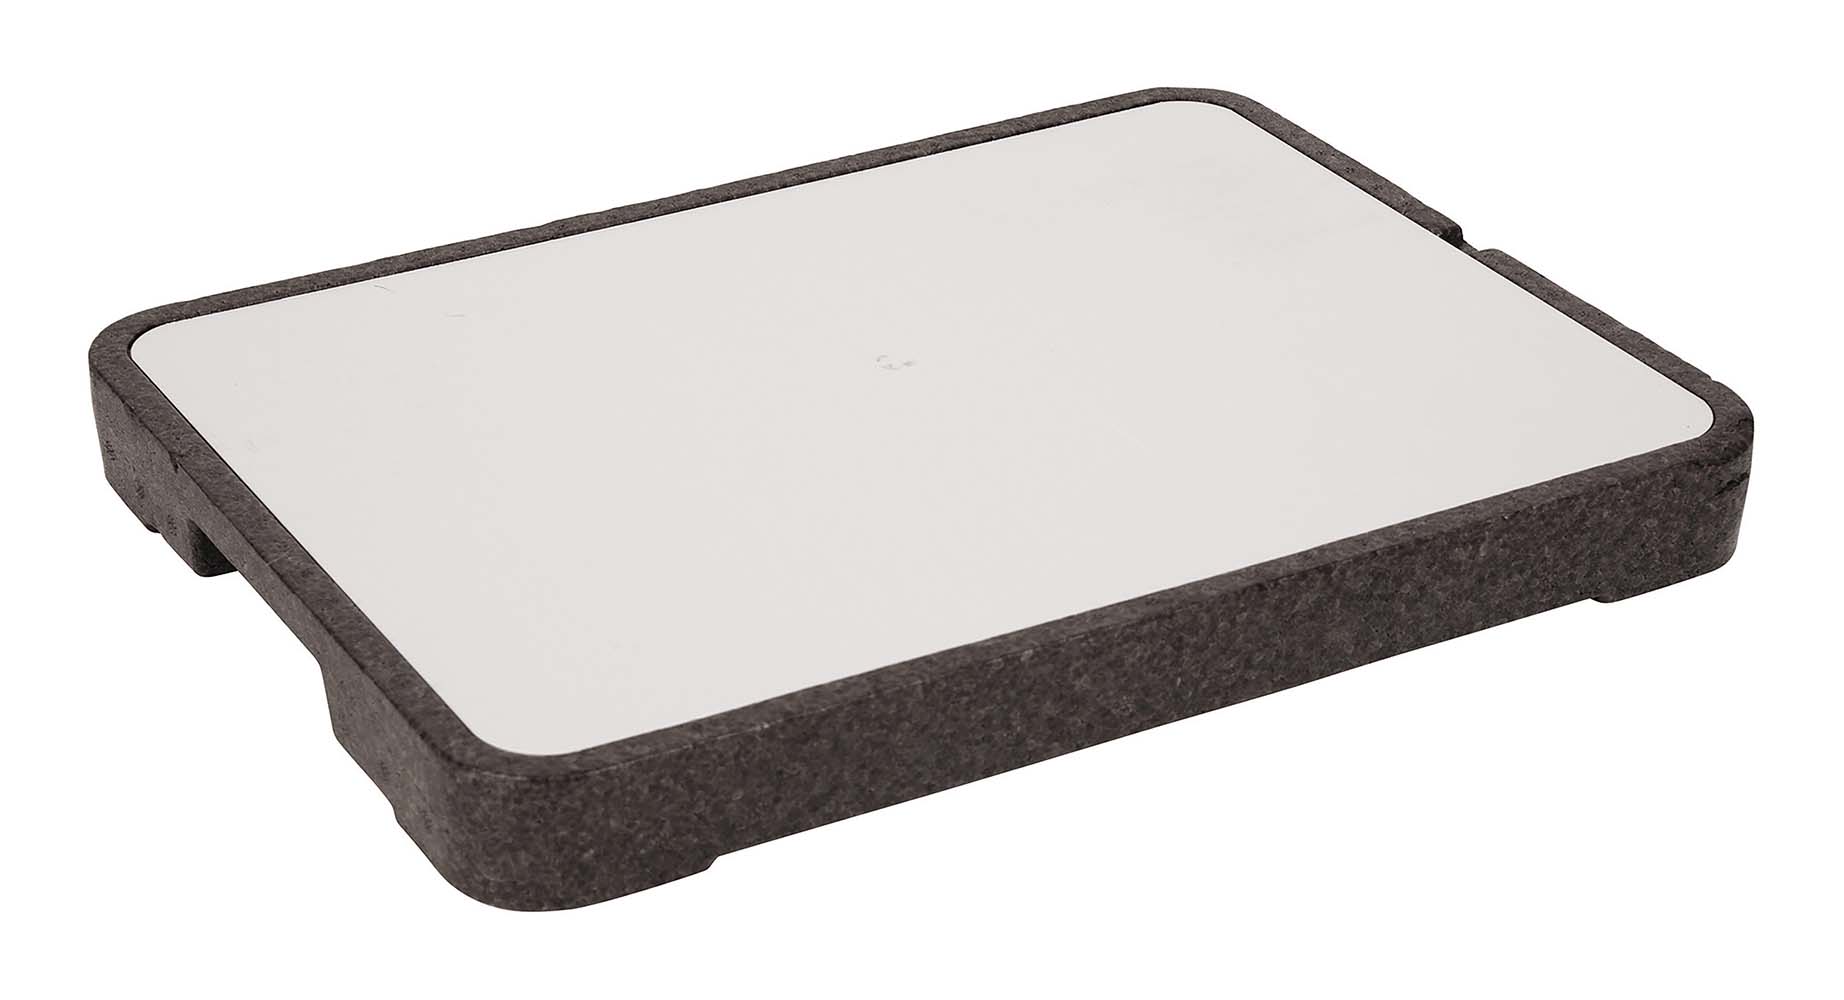 6702113 Convenient cool plate. This tray has a cooling element and is ideal for keeping food cool in a warm environment. Suitable for placing food directly on top or for cooling food in dishes or plates.